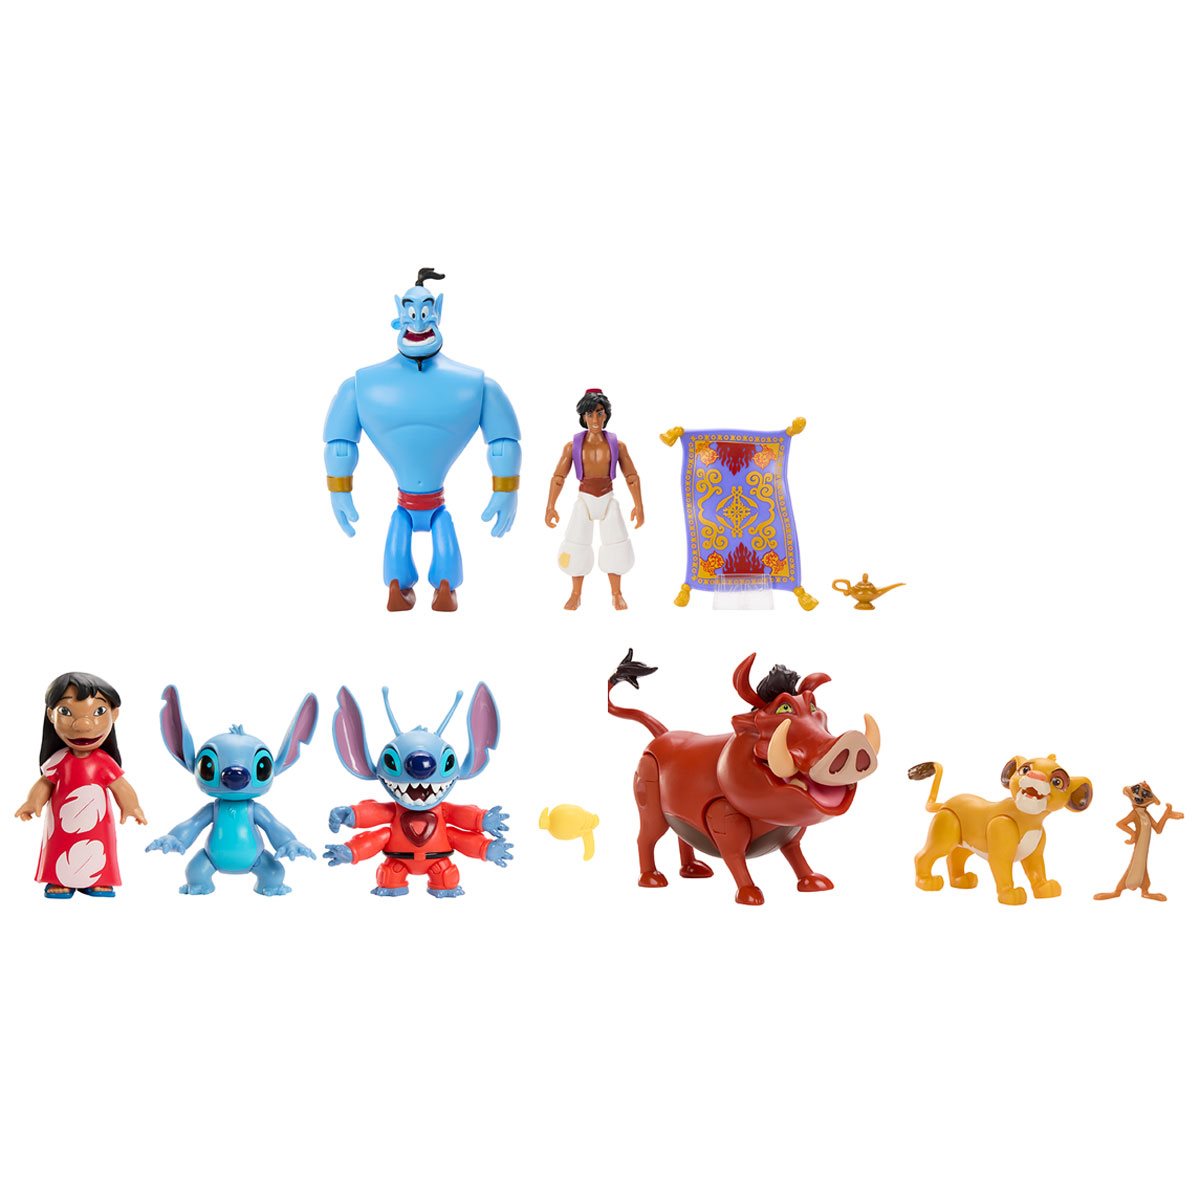 Disney Pixar Up 4-Inch Scale Action Figure 3-Pack